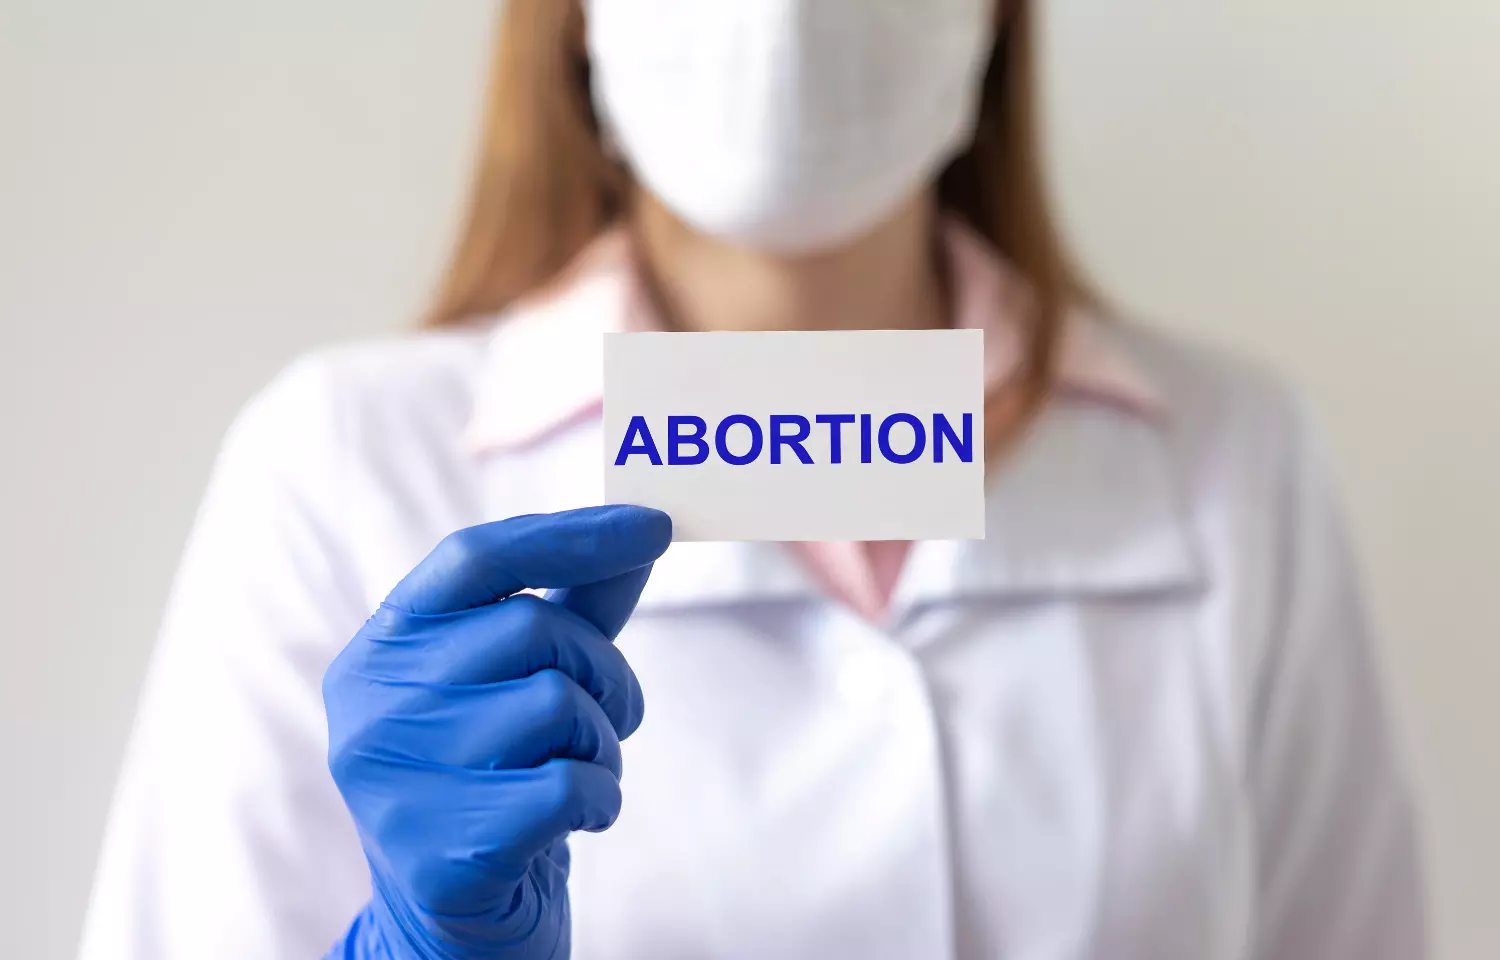 39,000 deaths occur due to unsafe abortions: WHO